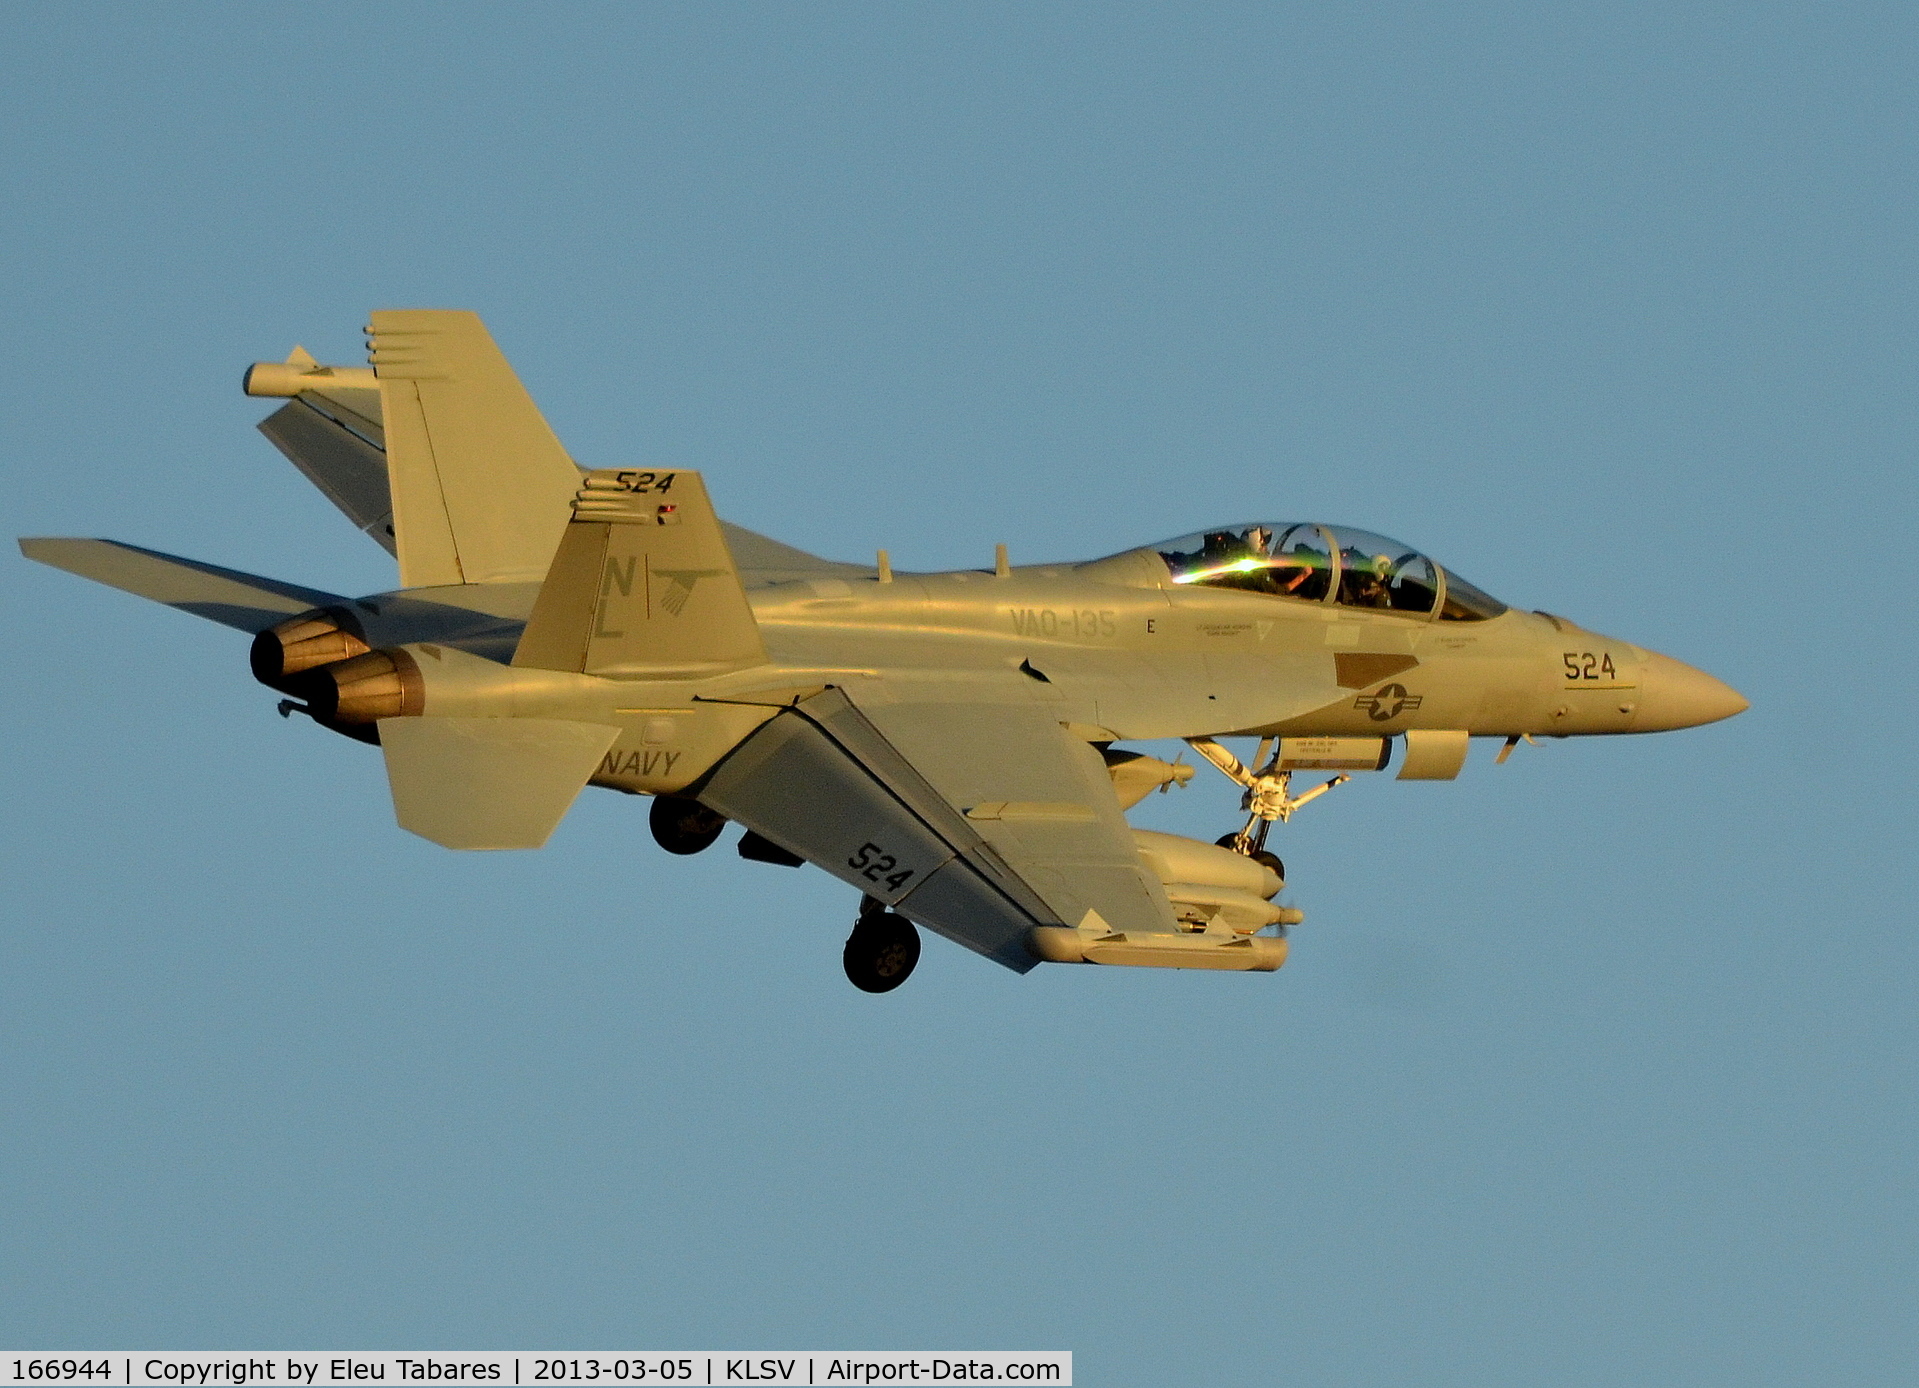 166944, Boeing EA-18G Growler C/N G-29, Taken during Red Flag Exercise at Nellis Air Force Base, Nevada.